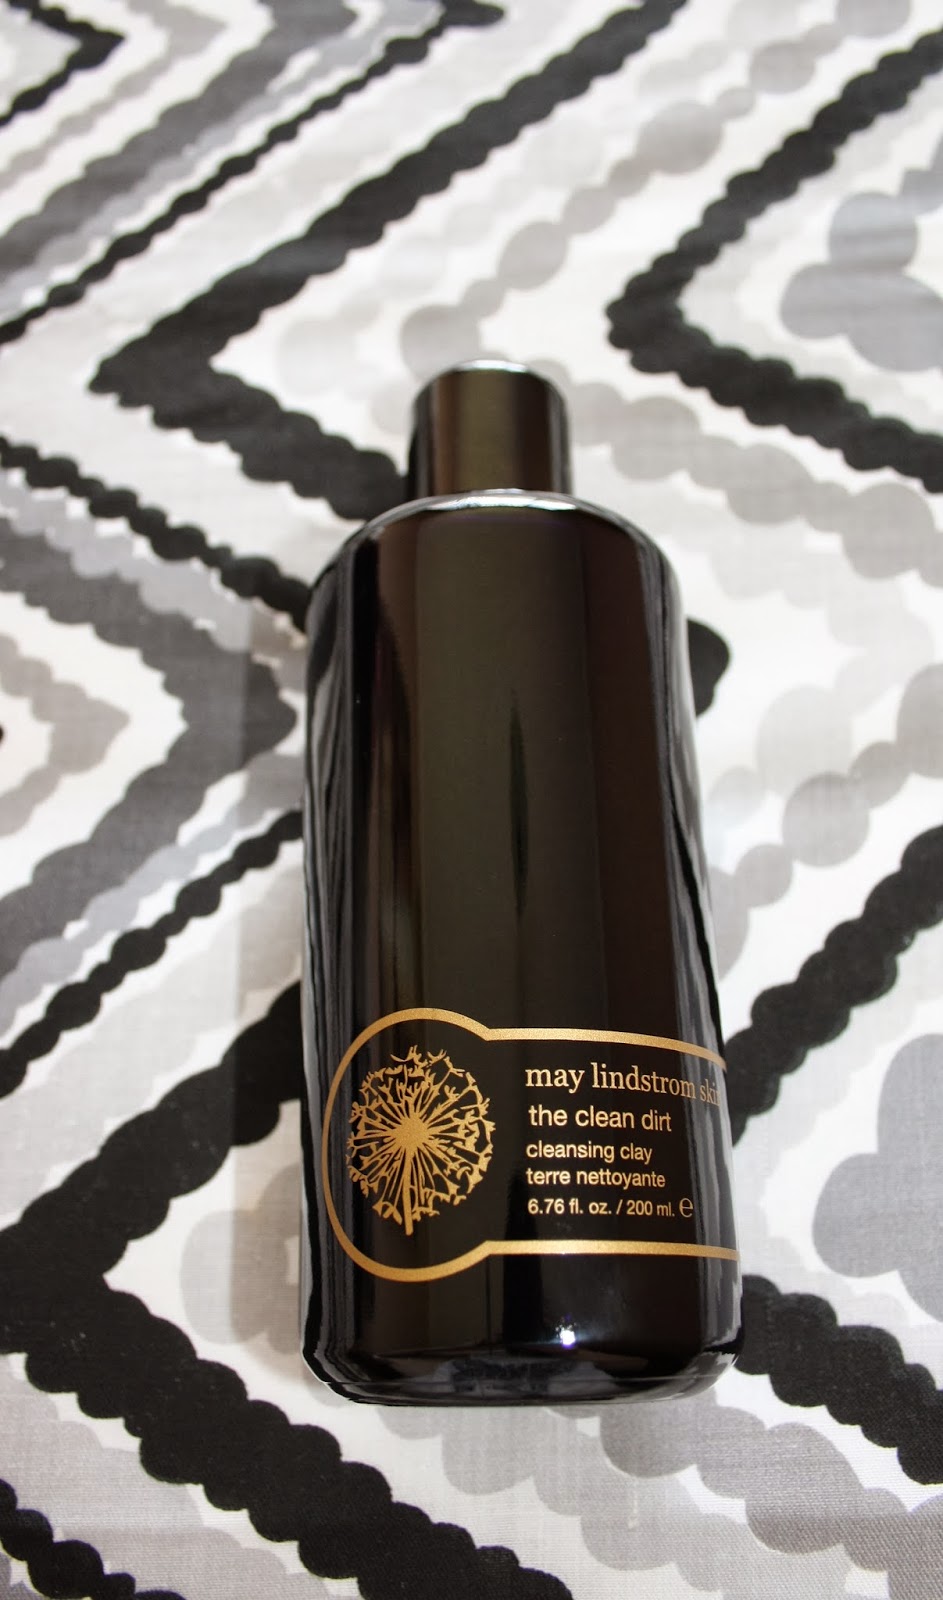 The Good Stuff – May Lindstrom Skin